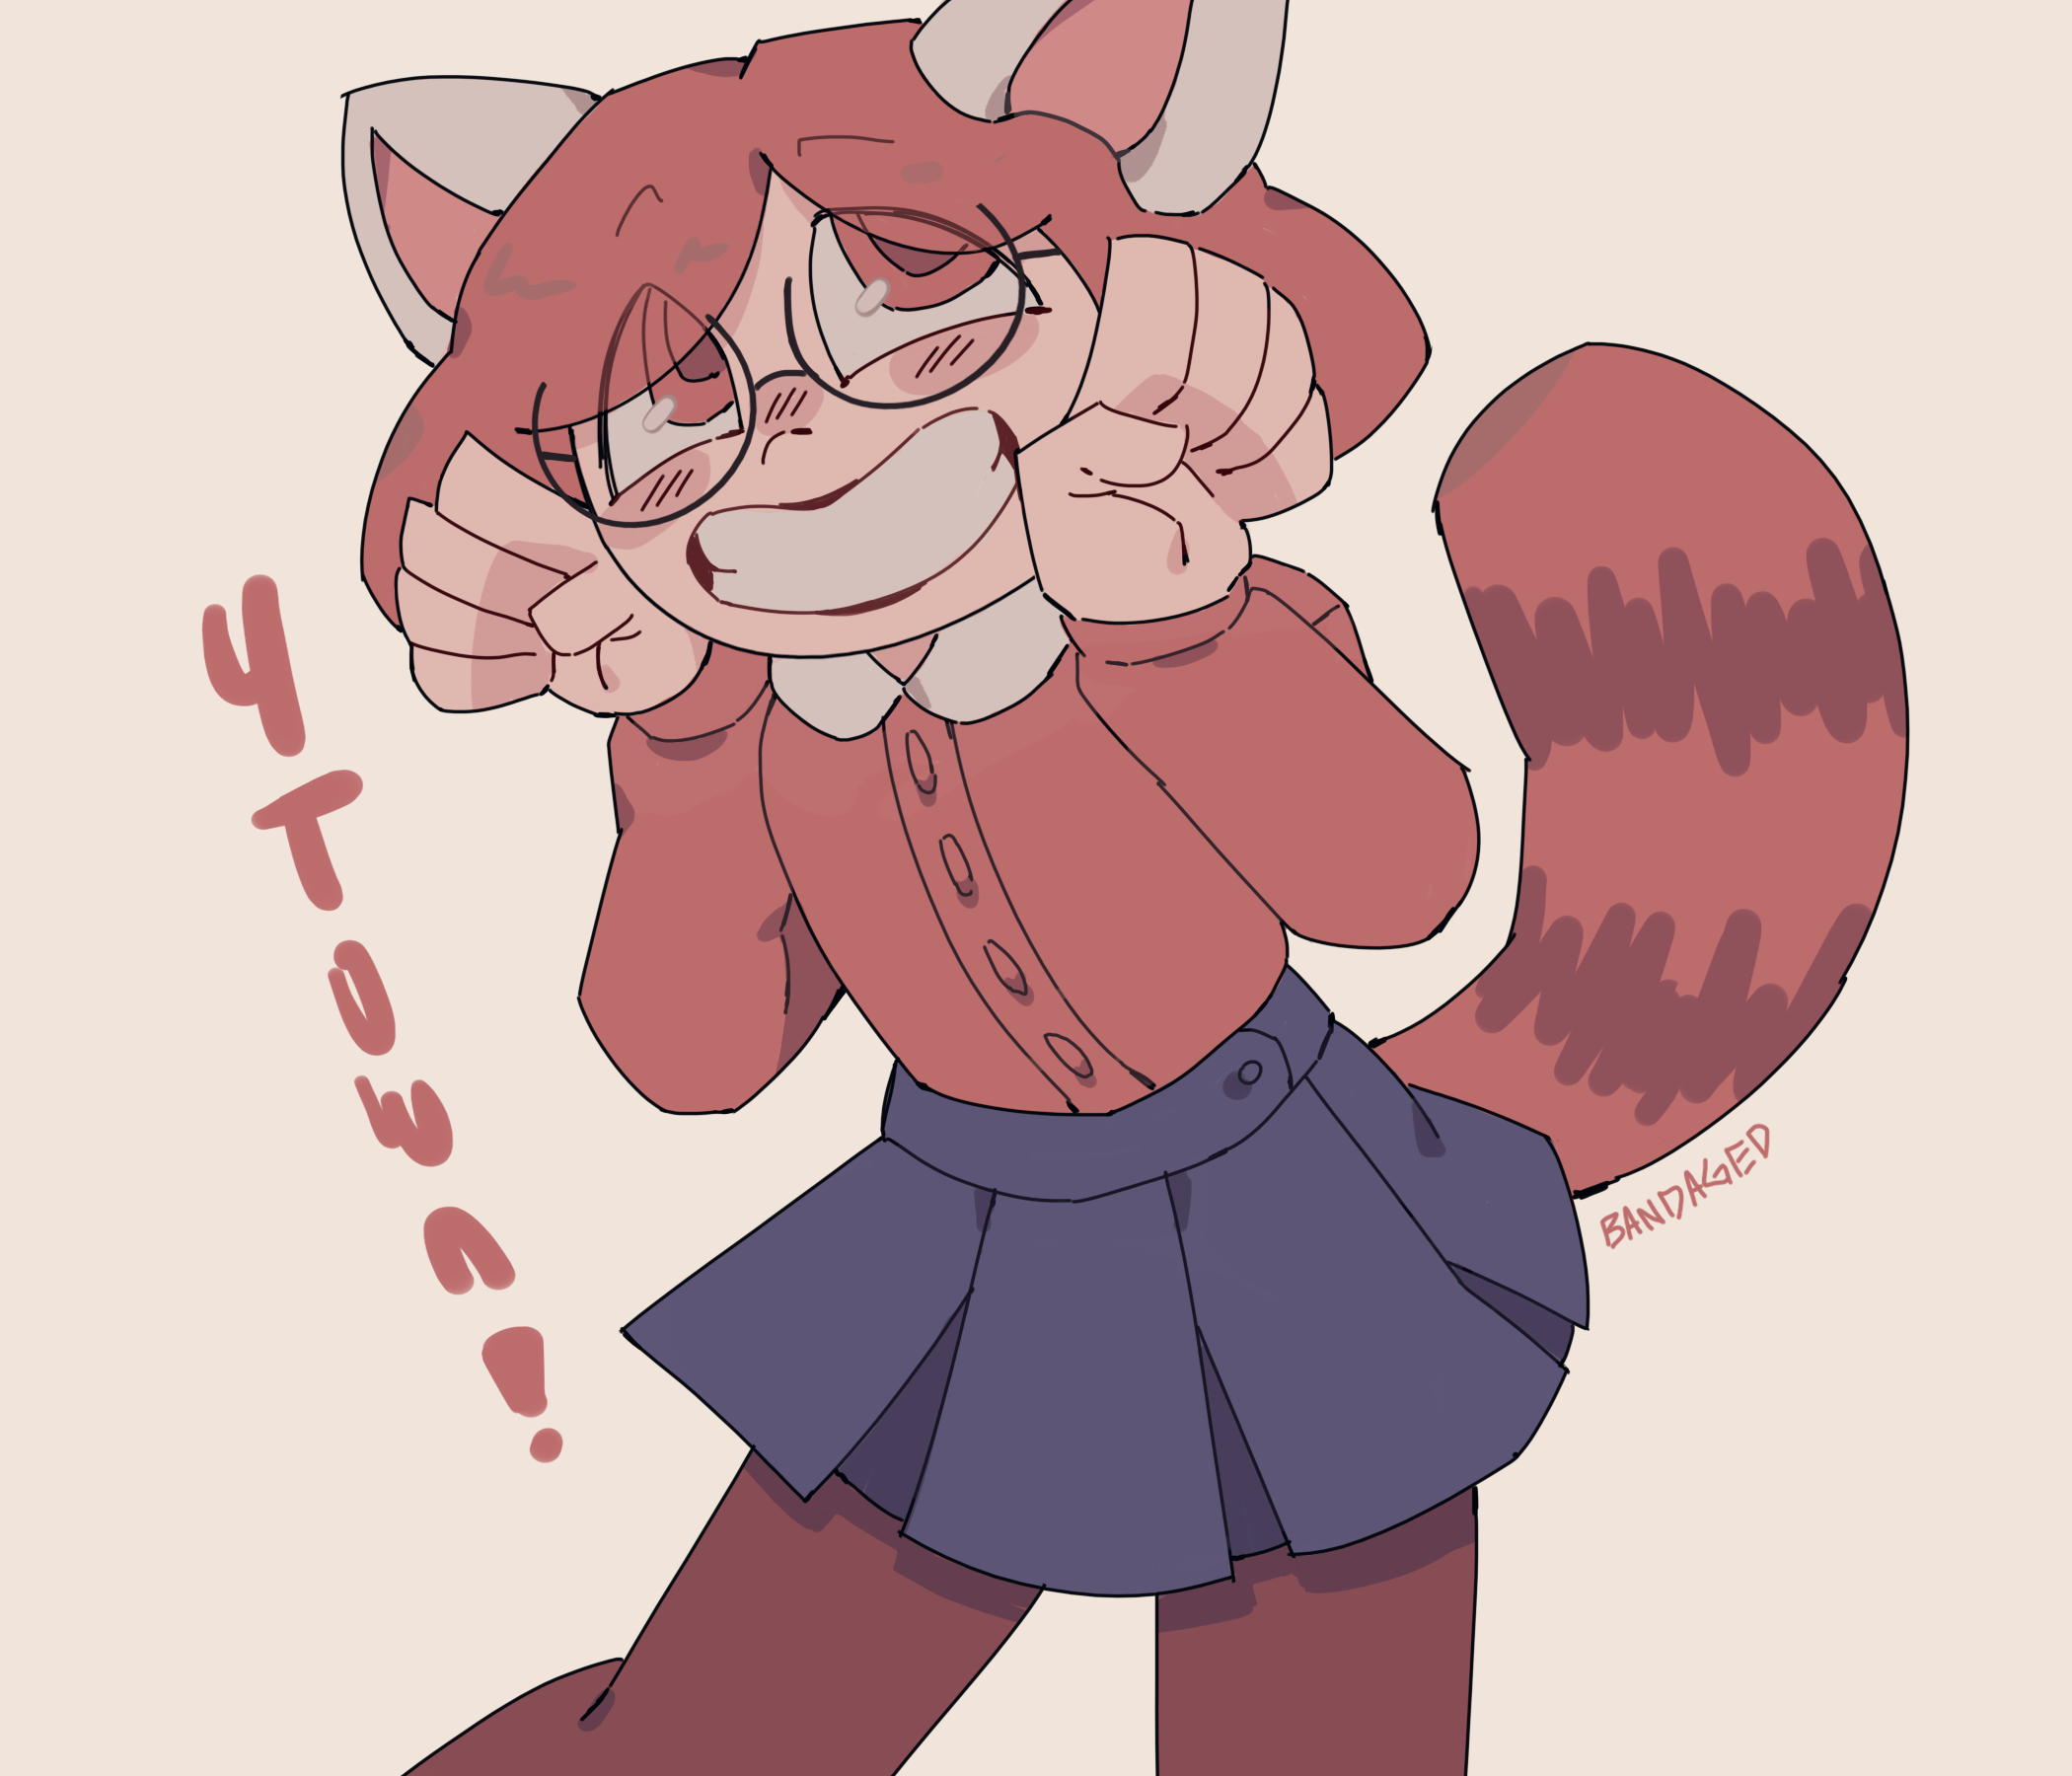 A Cartoon Girl With Glasses And A Red Kitty